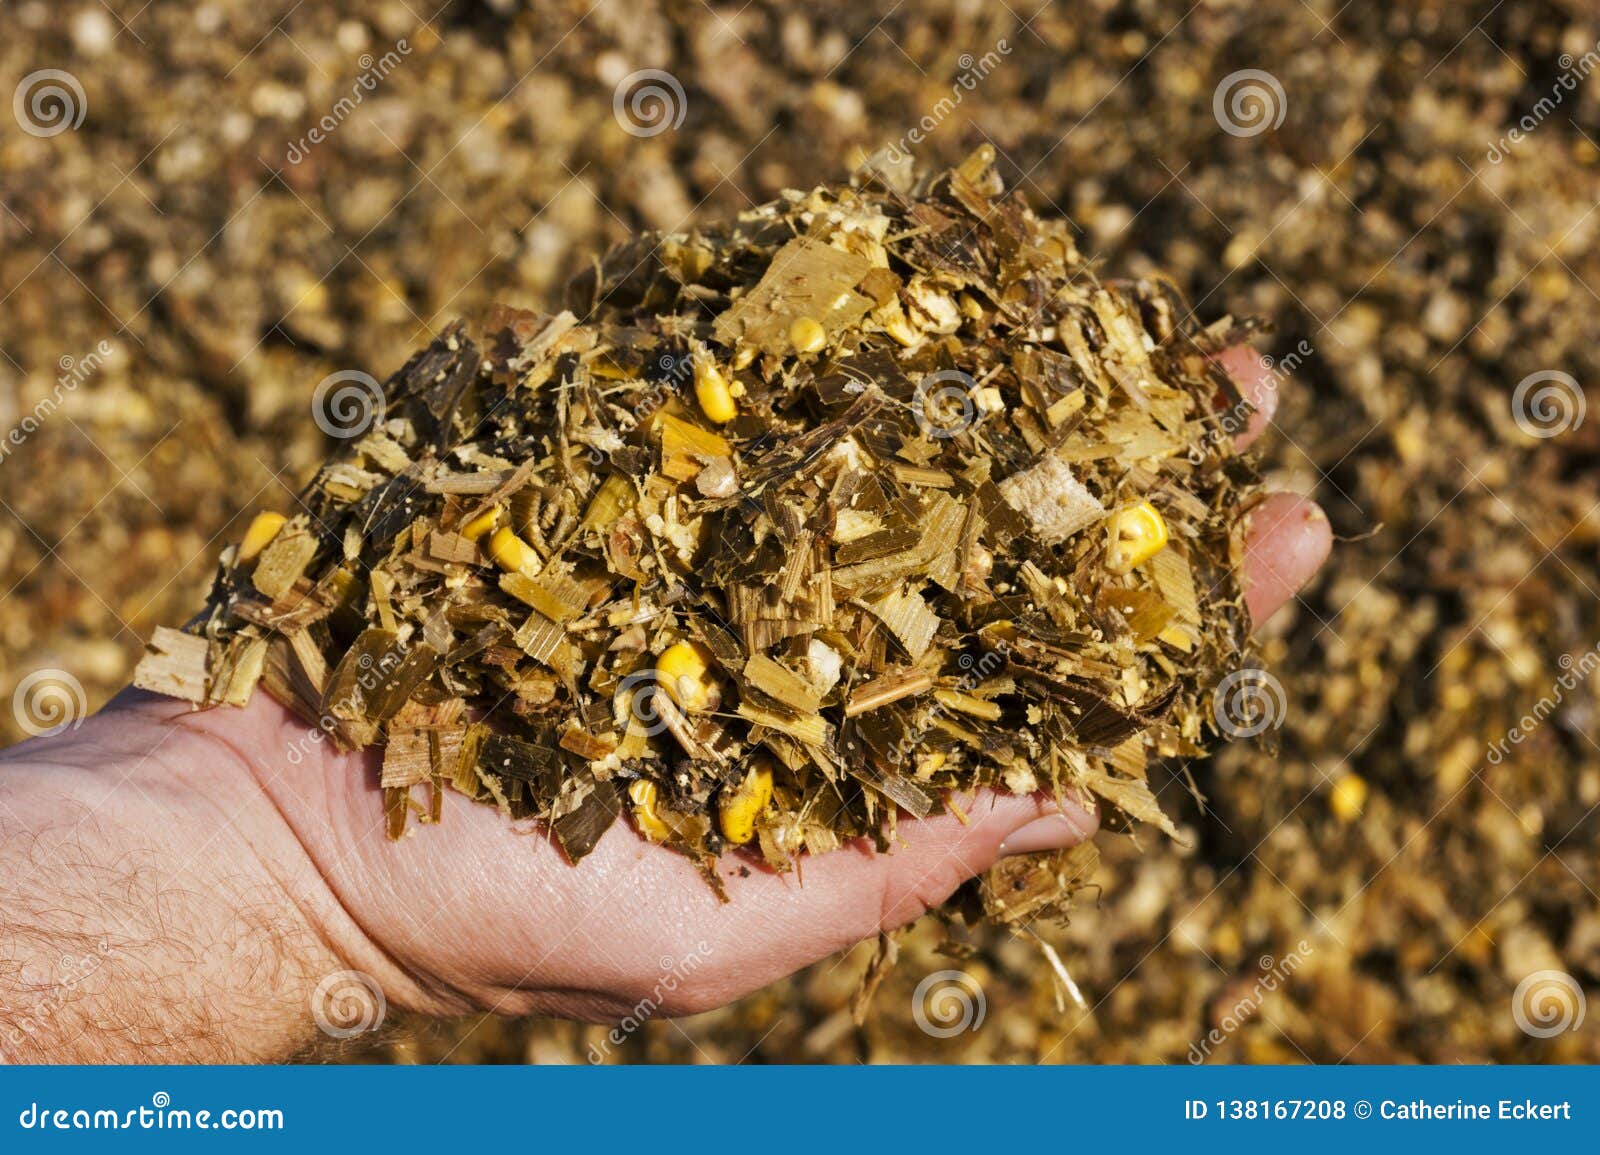 a farmer holding golden, fermented corn silage ready to feed